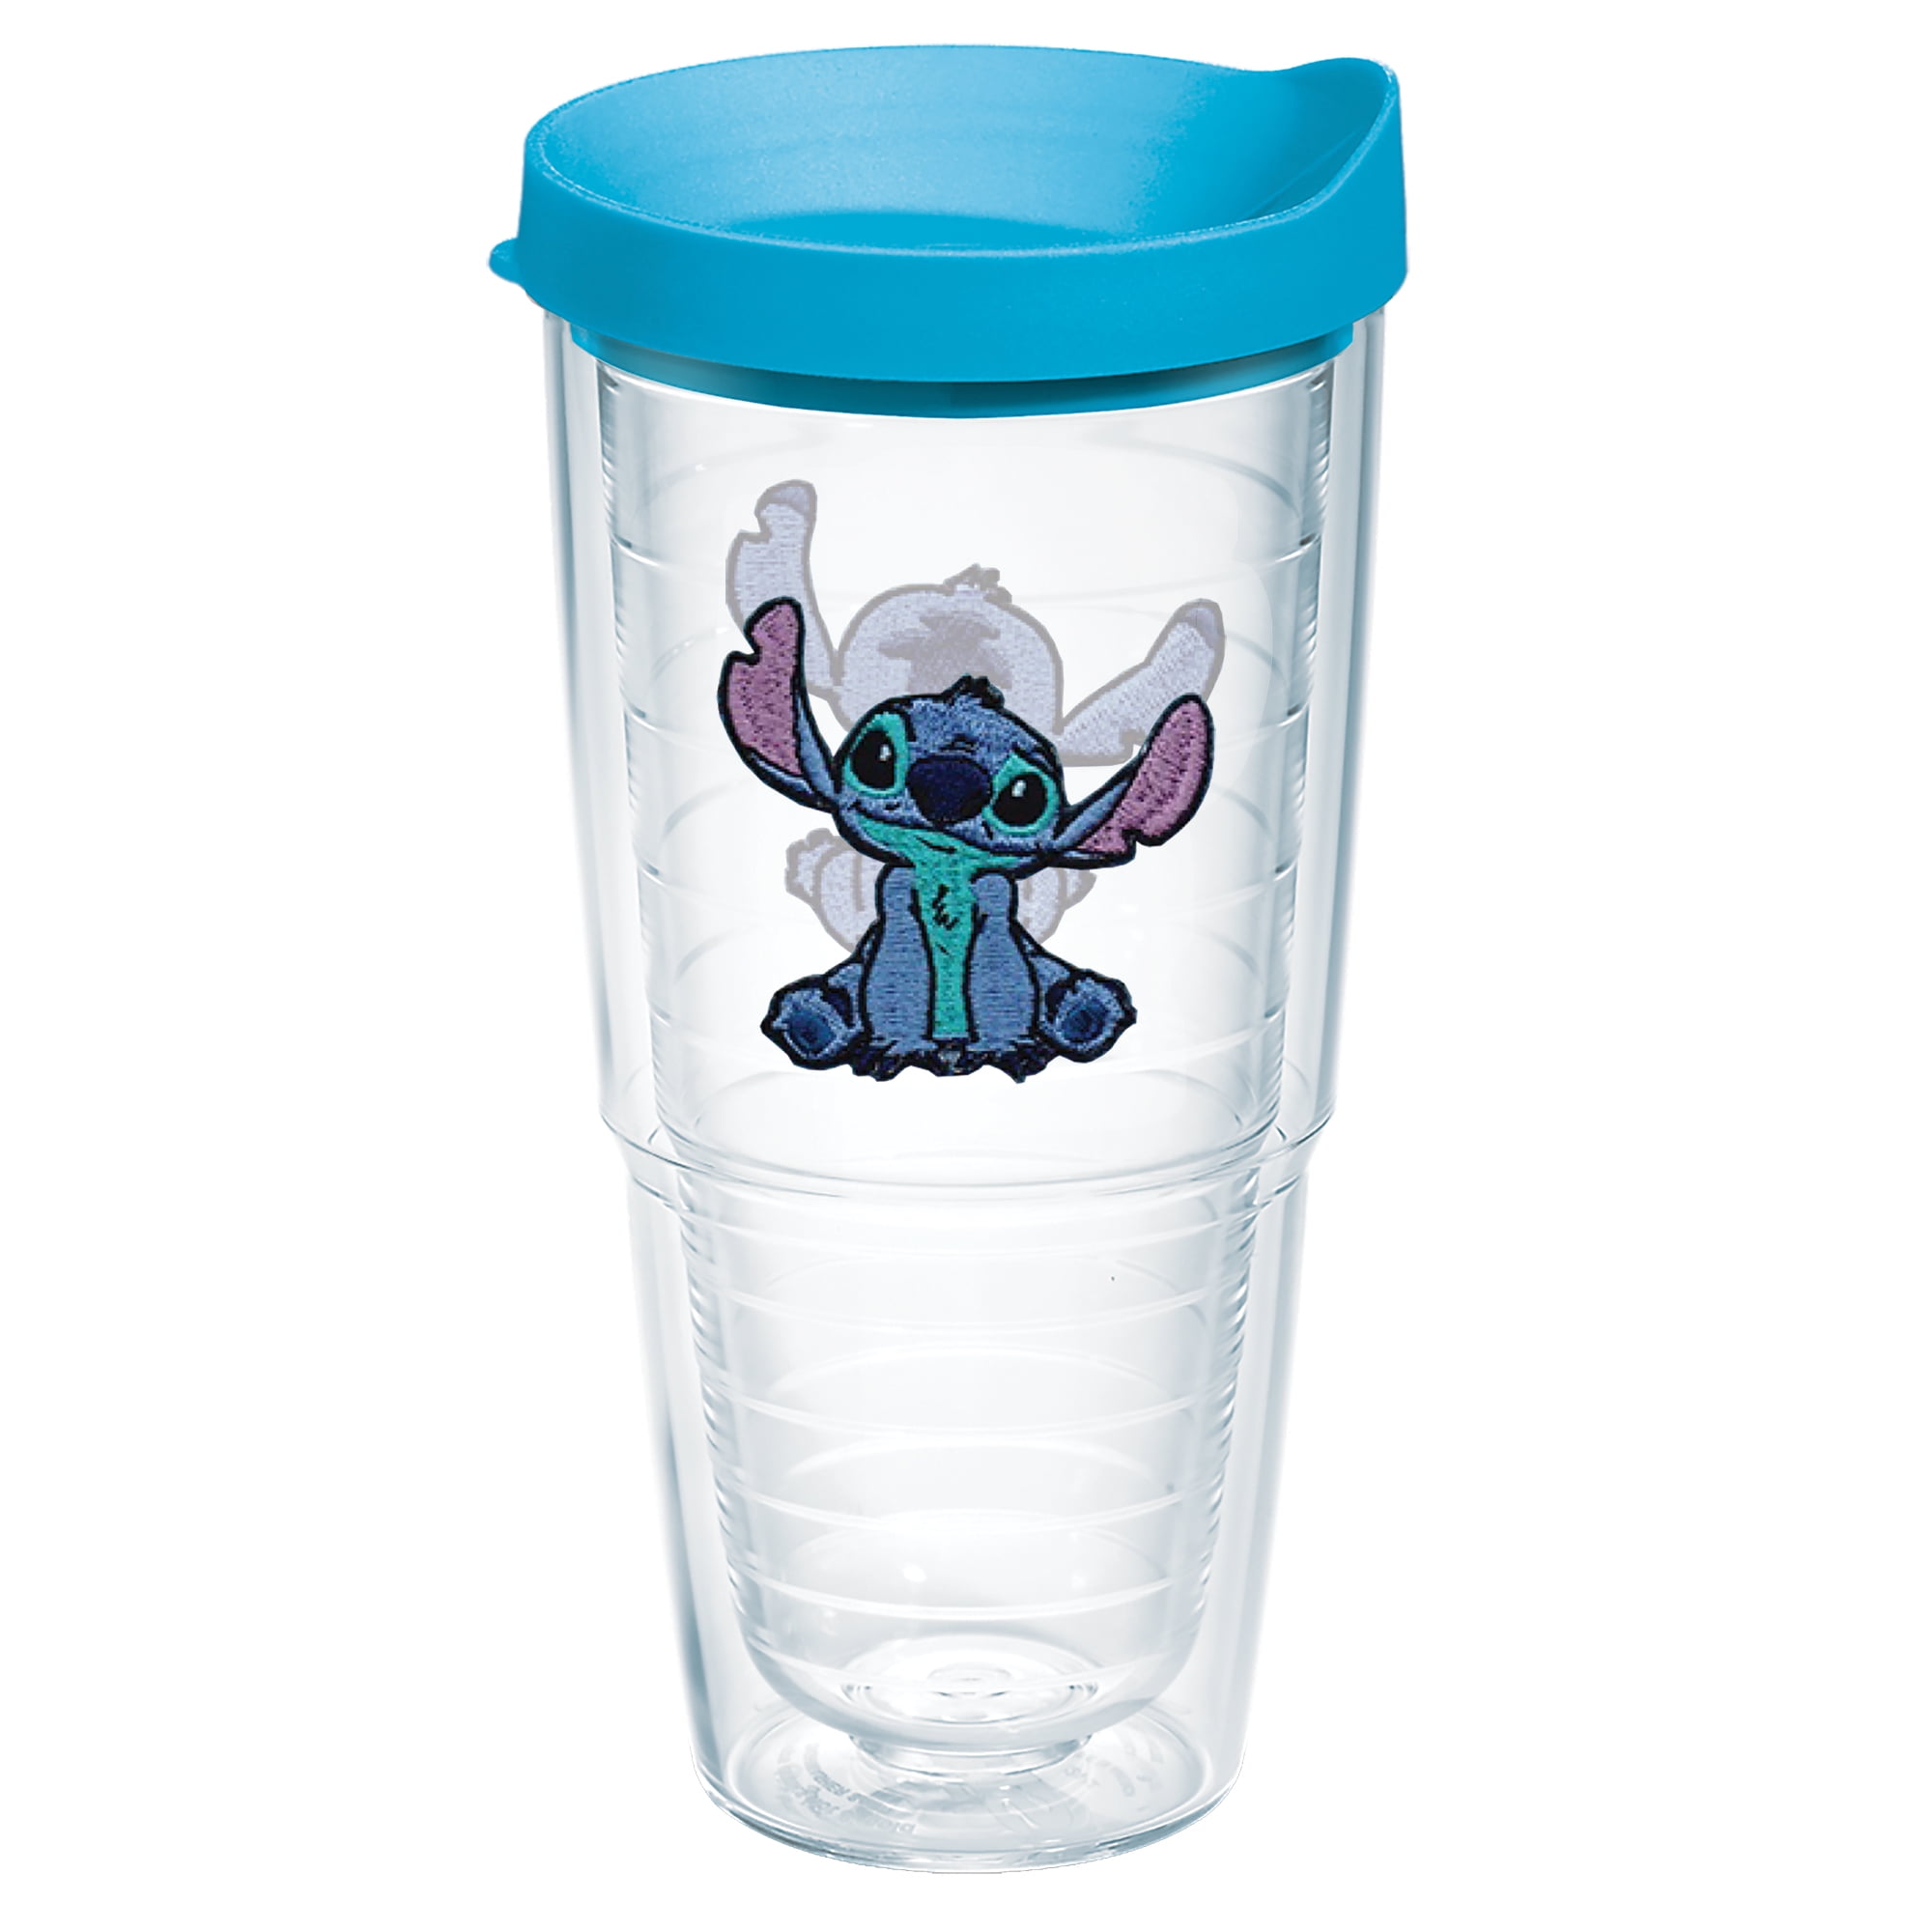 I'm really obsessed with this thermos bottle 🤩#stitch #disney